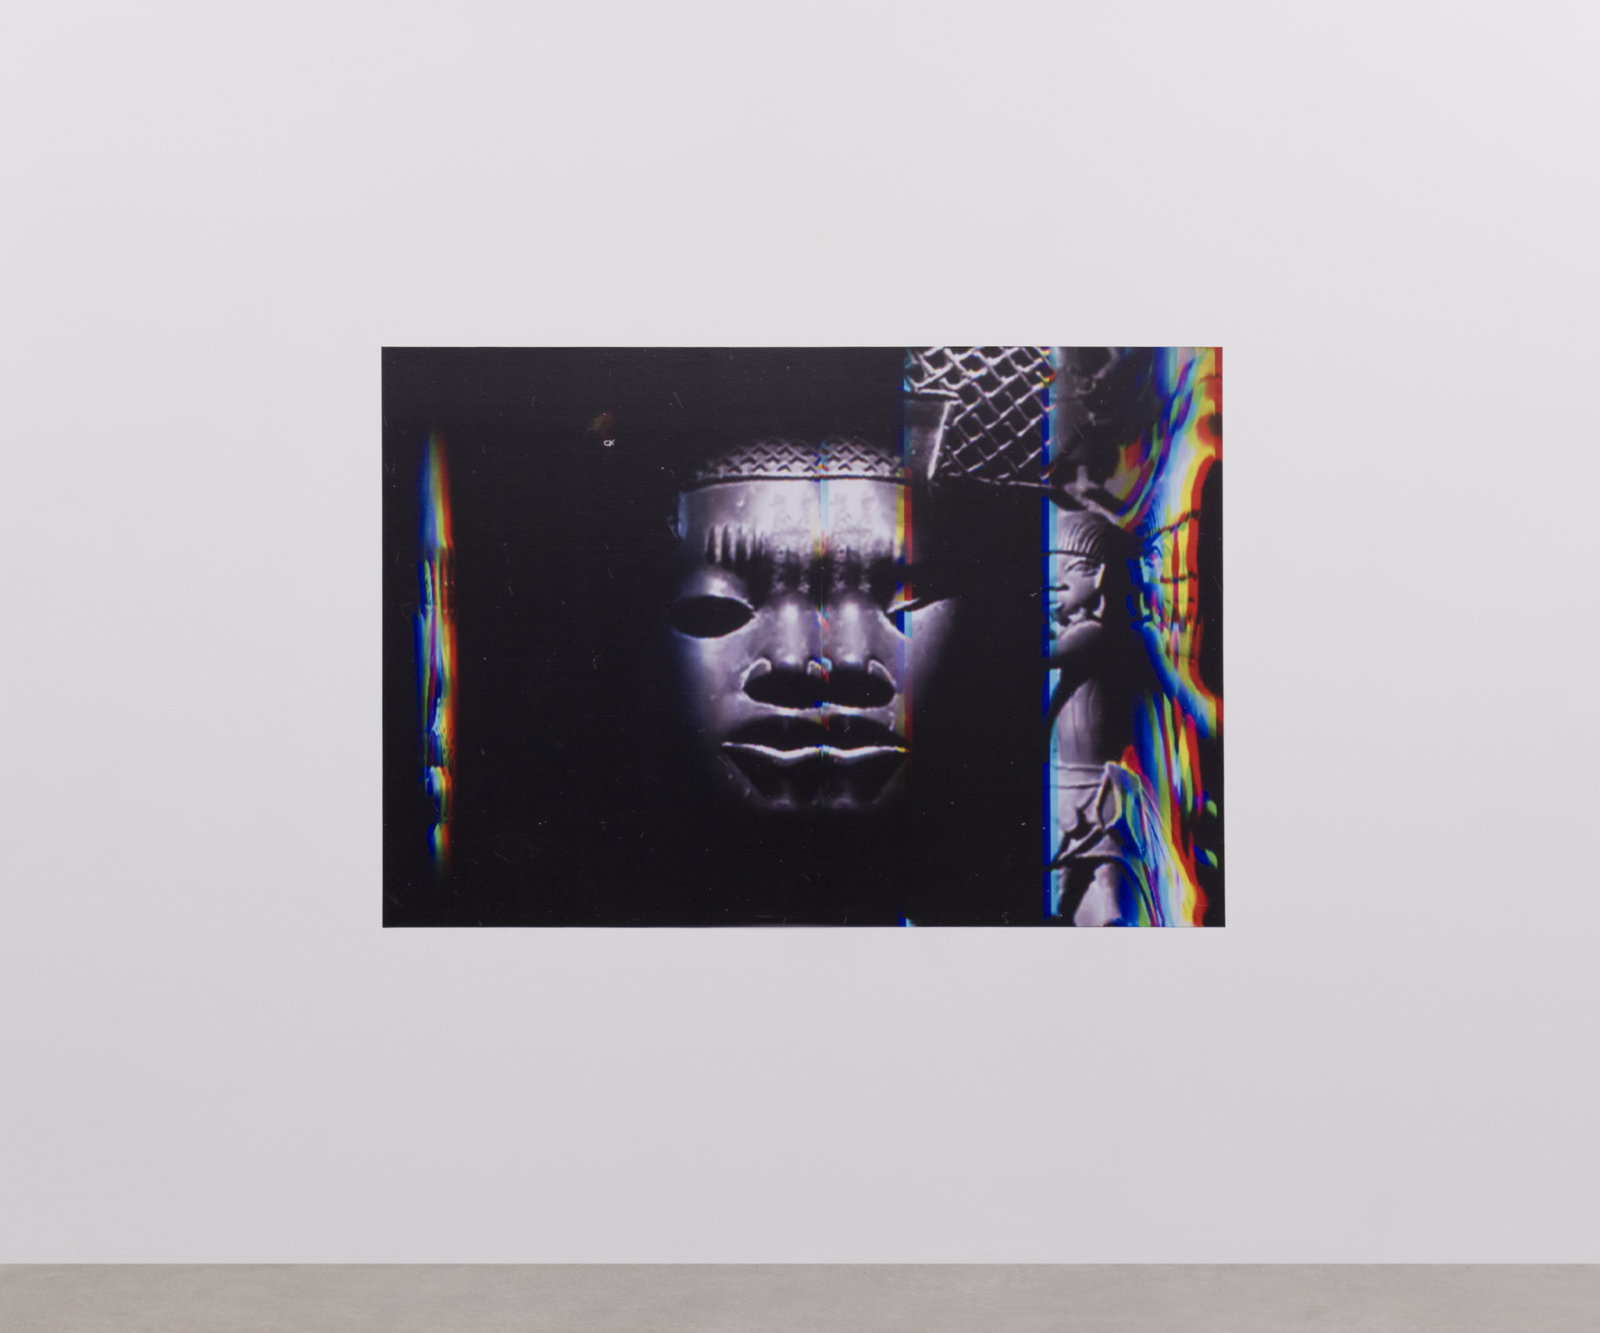 Raymond Boisjoly, (What Comes After) What Came Before, 2015, solvent based inkjet print on vinyl, 52 x 75 in. (132 x 191 cm)